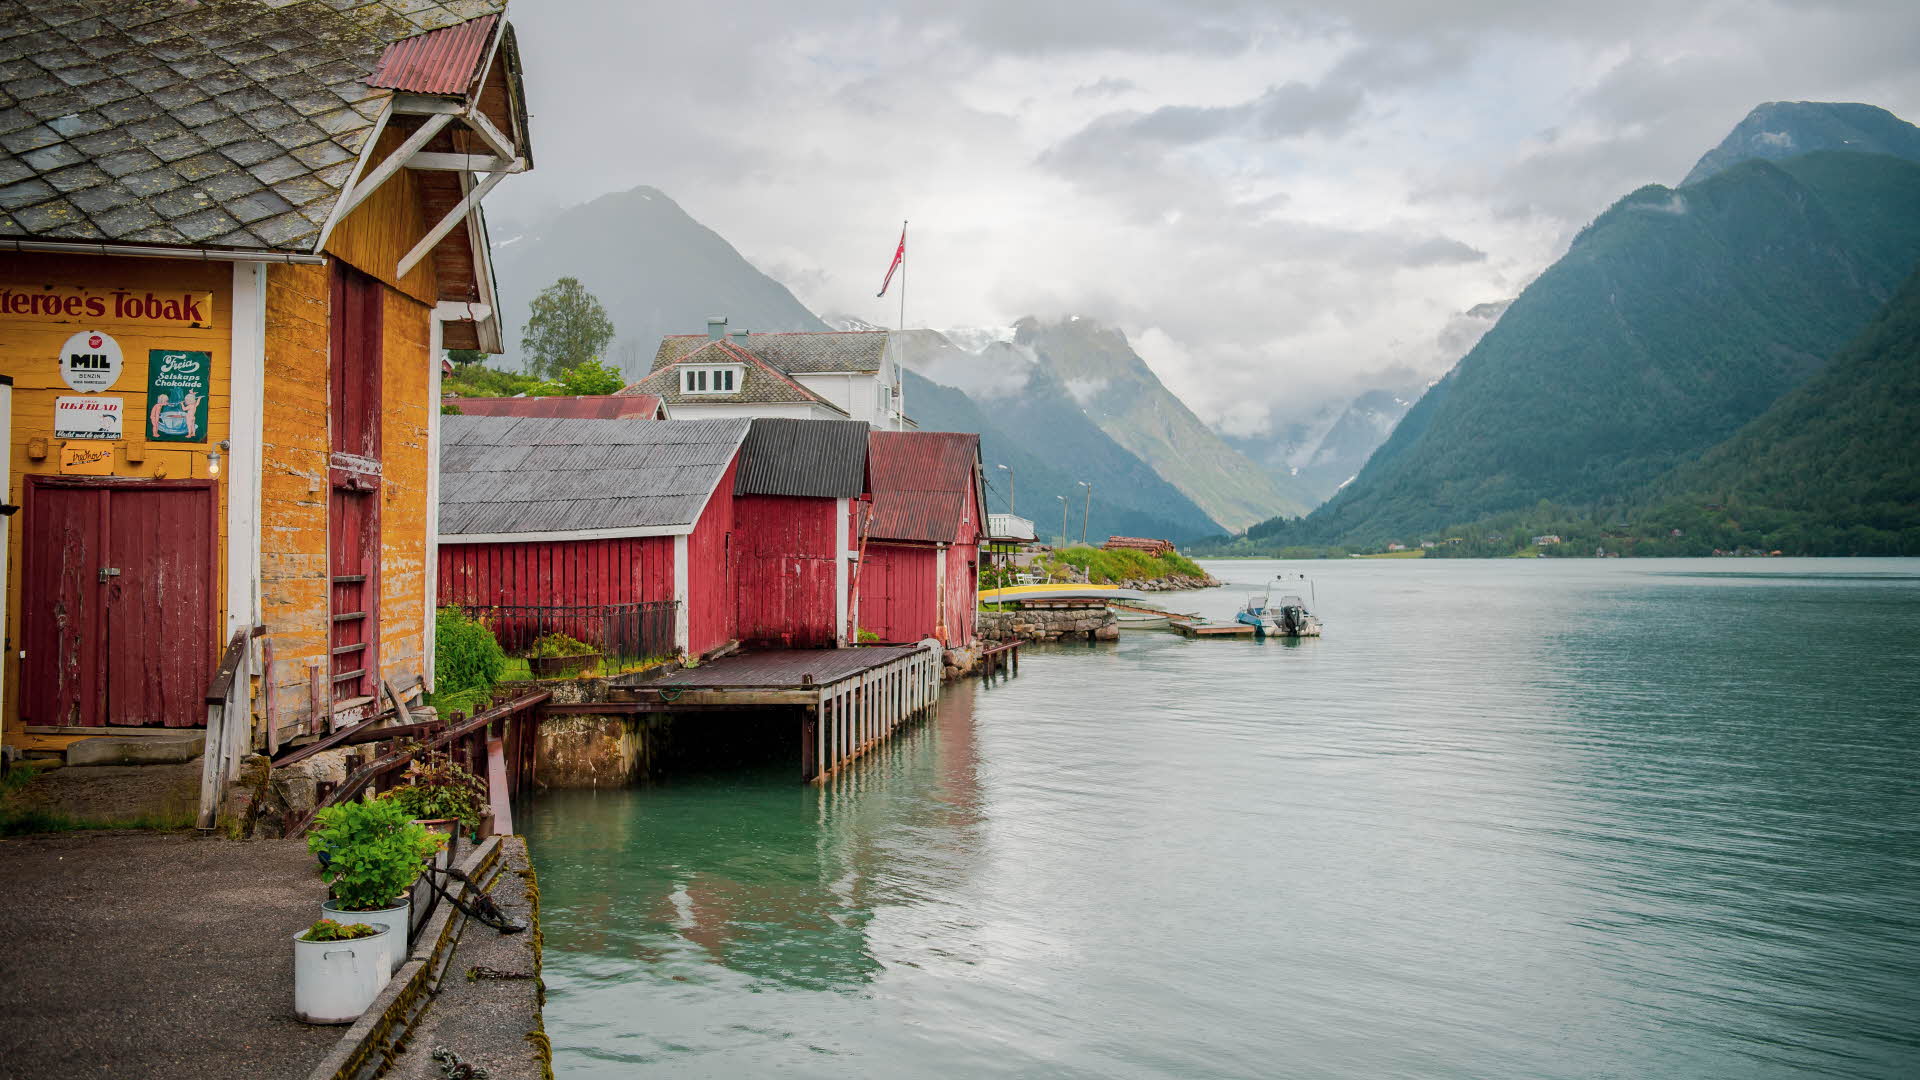 One yellow and two red boathouses along the Fjærlandsfjord, with grey clouds over the mountains